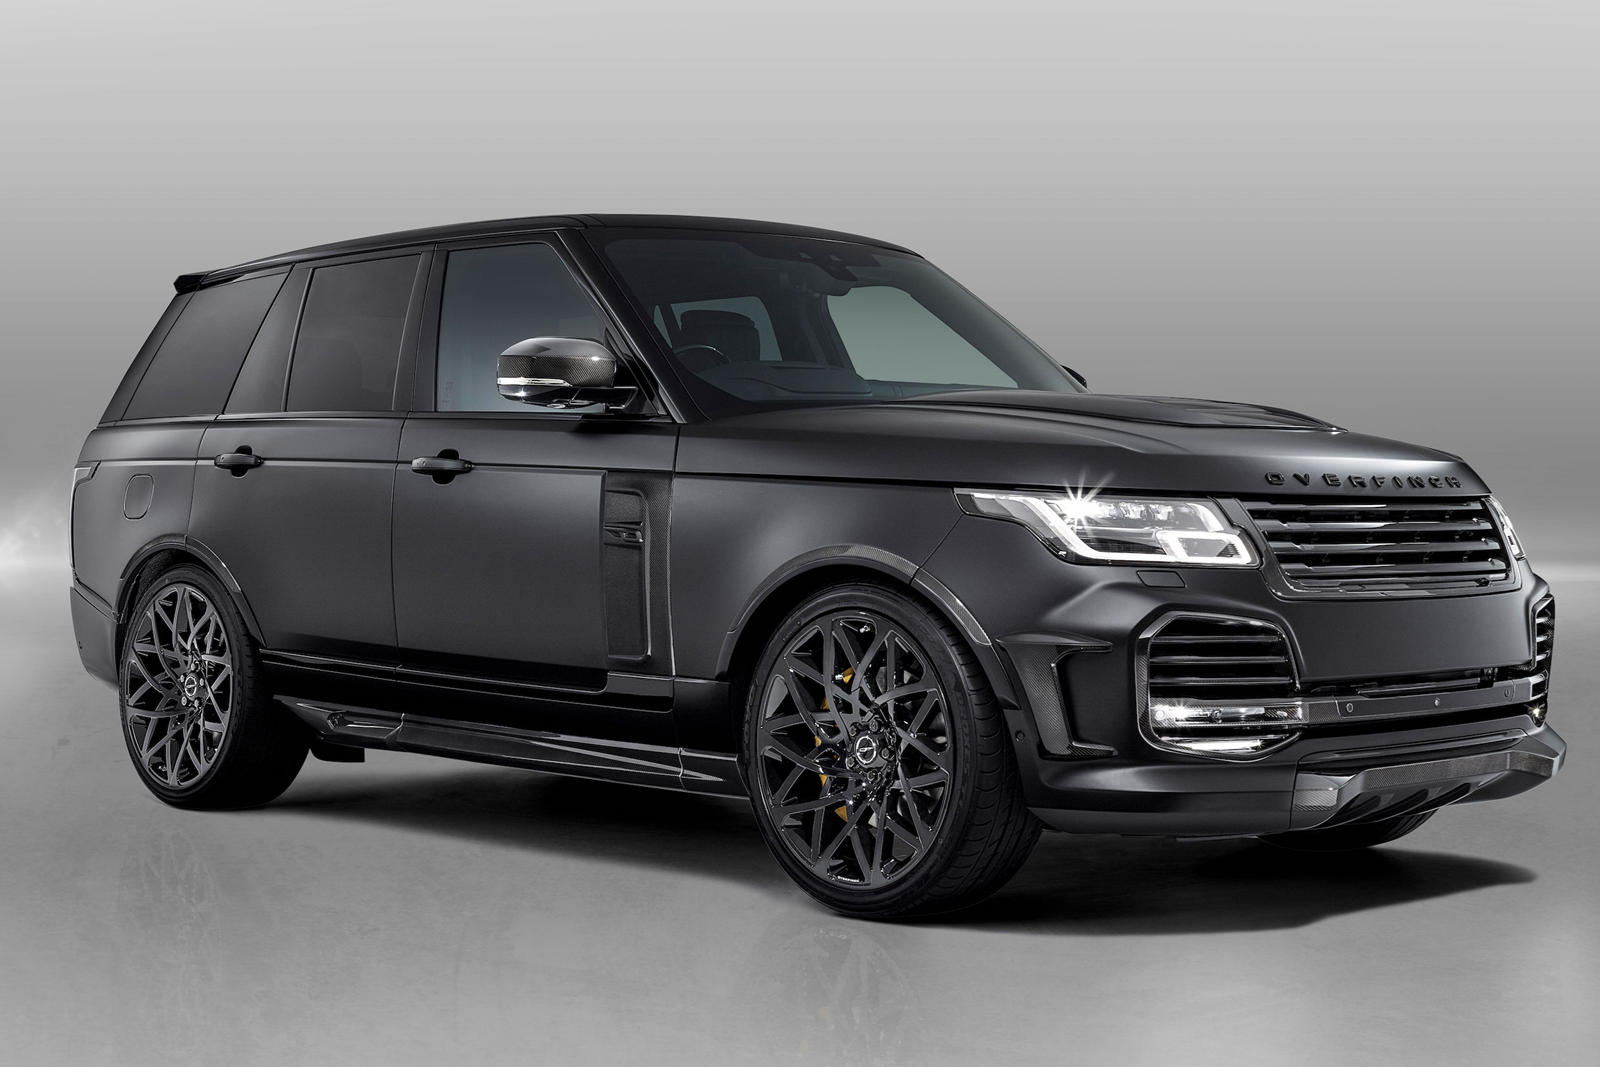 Beste Overfinch Gives Range Rover A Bold New Look | CarBuzz QJ-98